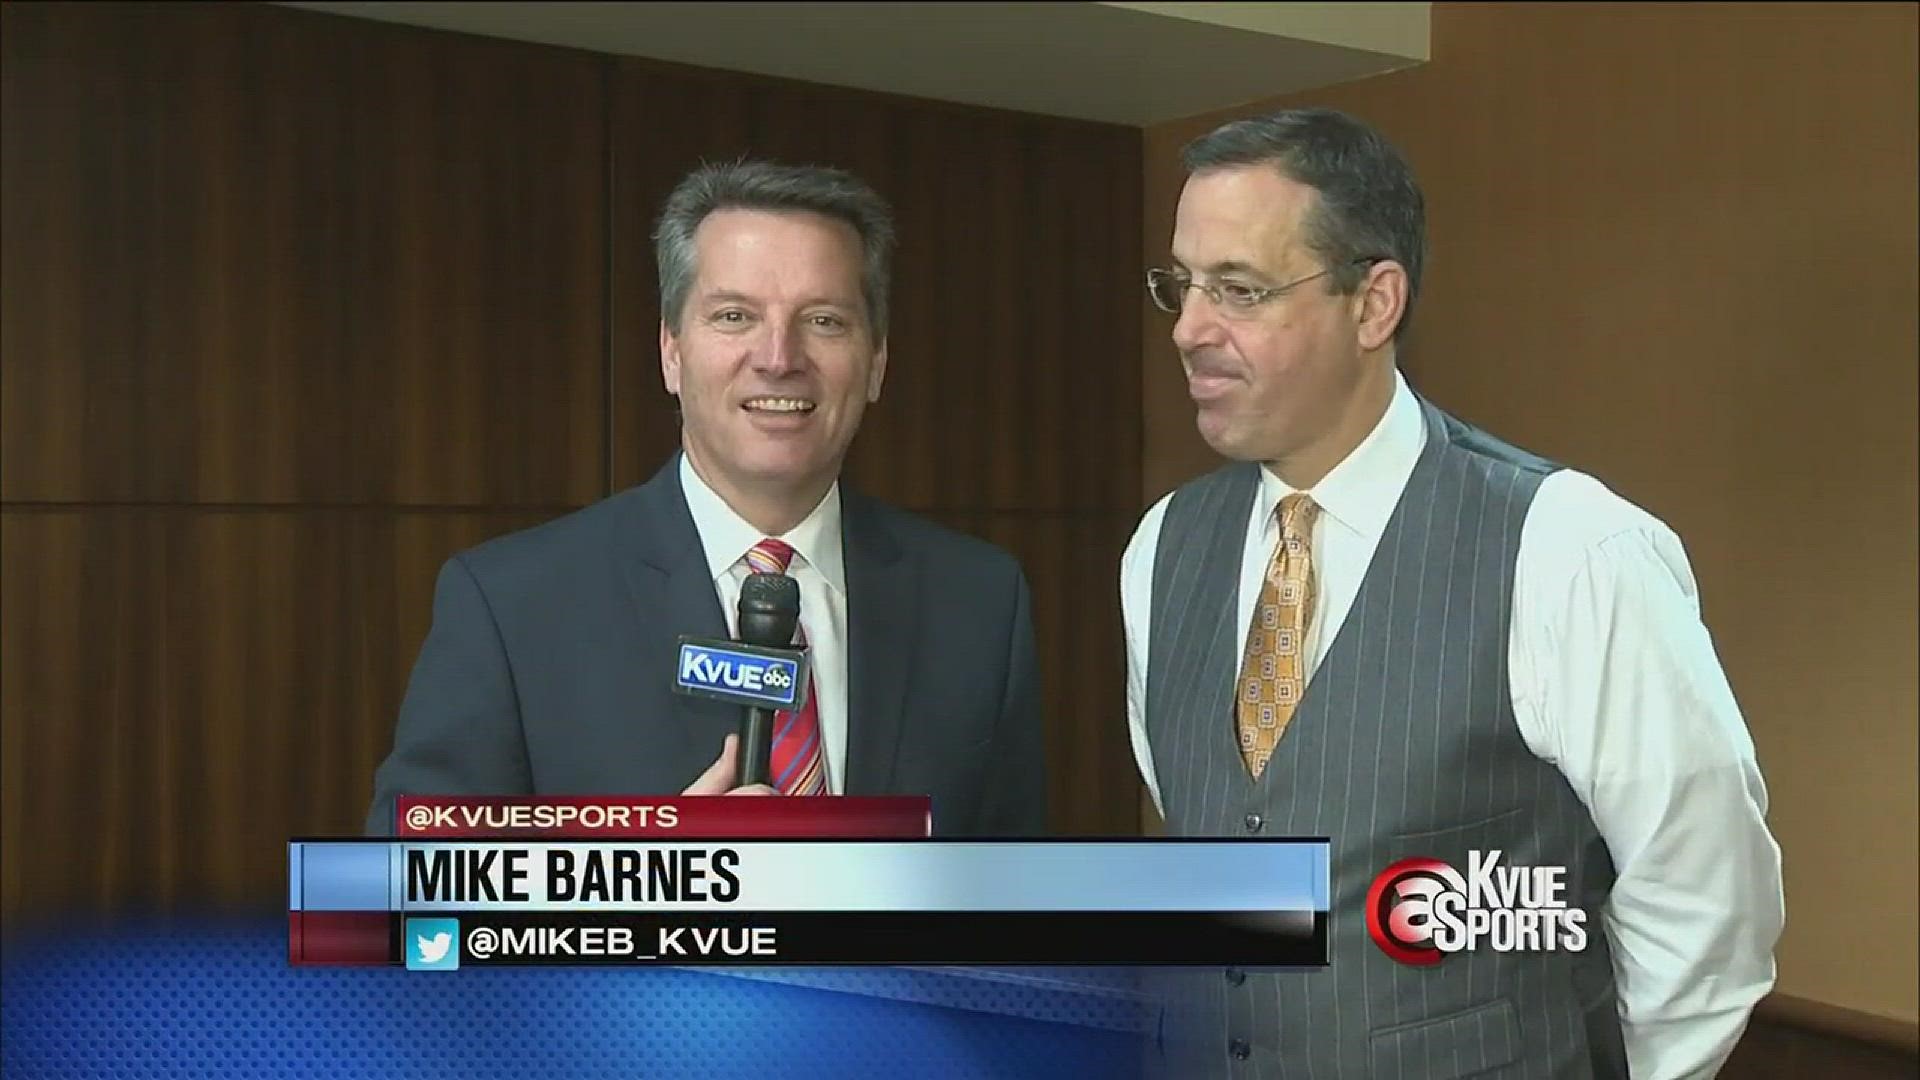 KVUE's Mike Barnes talks with new UT athletic director Chris Del Conte